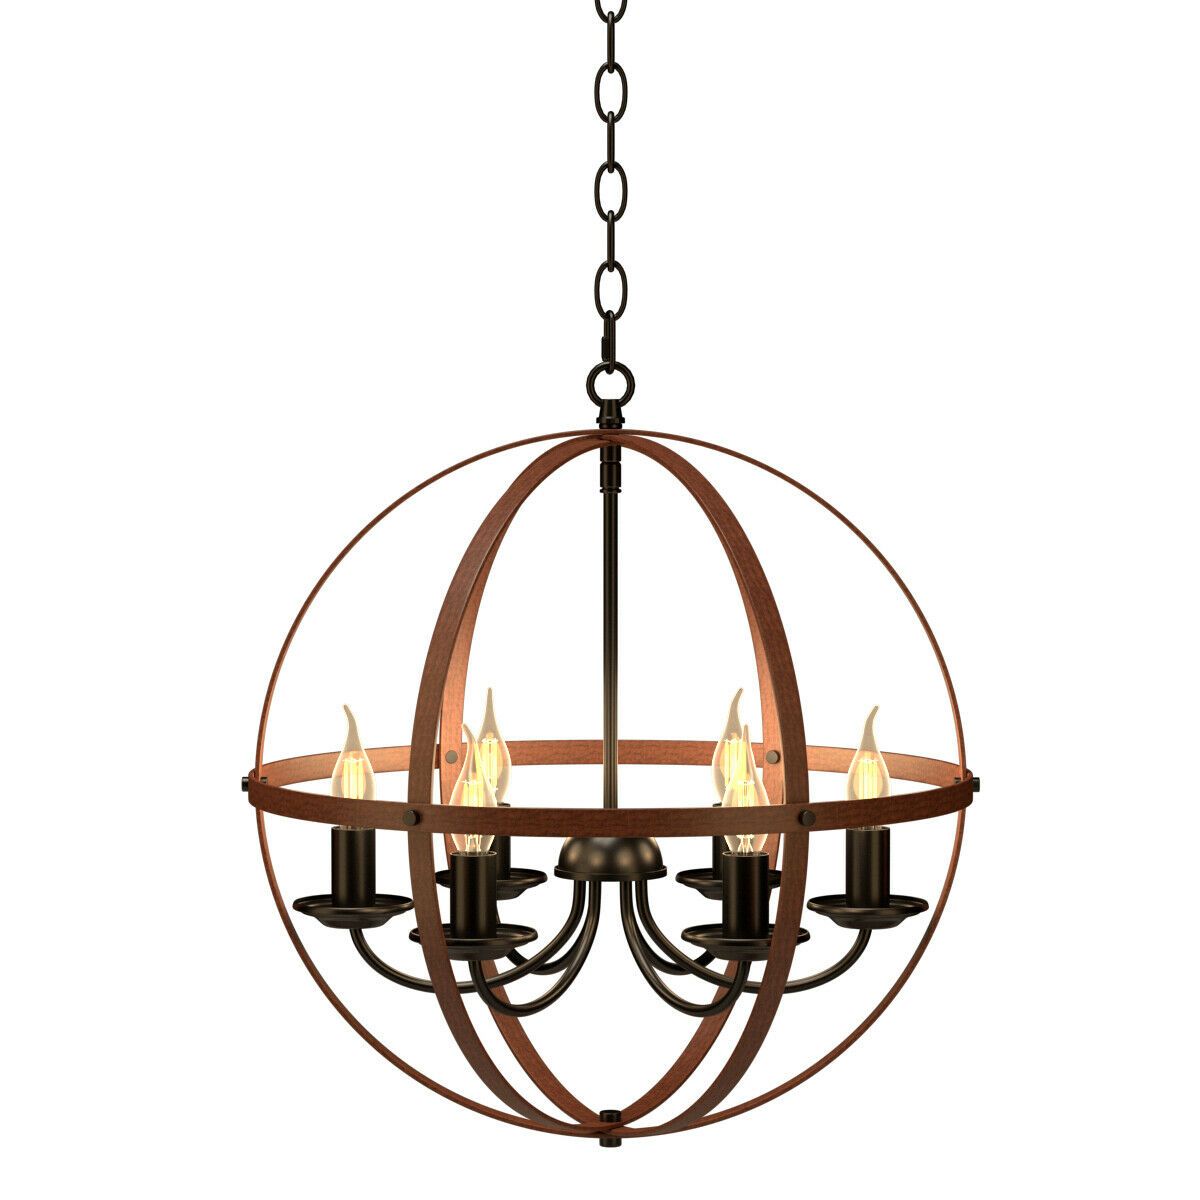 Gymax 6 Light Orb Chandelier Rustic Vintage Ceiling Lamp W Intended For Six Light Chandeliers (View 6 of 15)